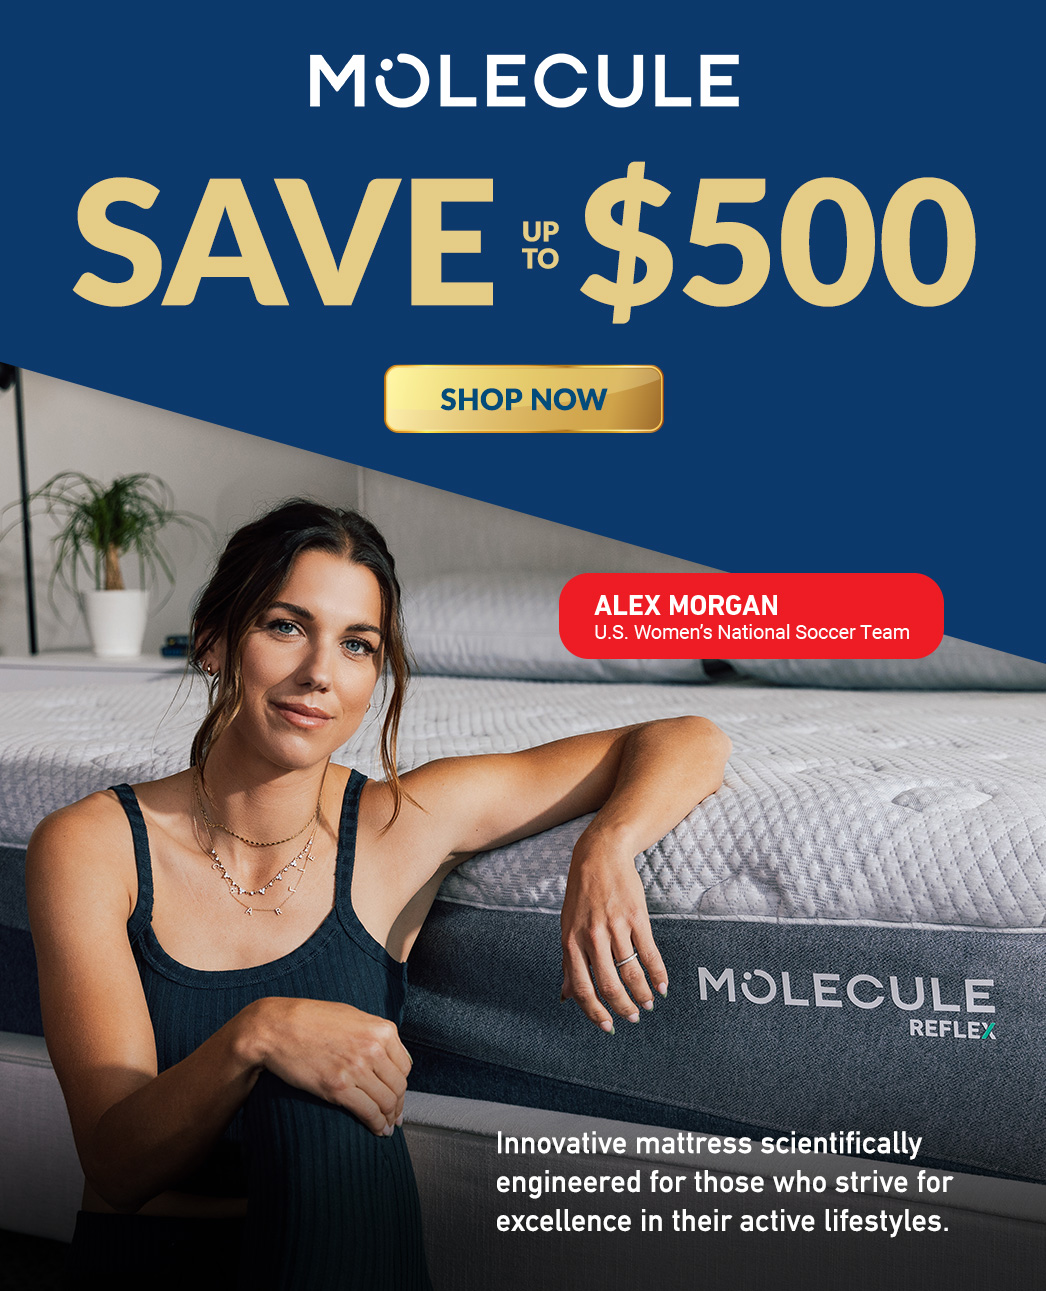 Save up to $500 on Molecule